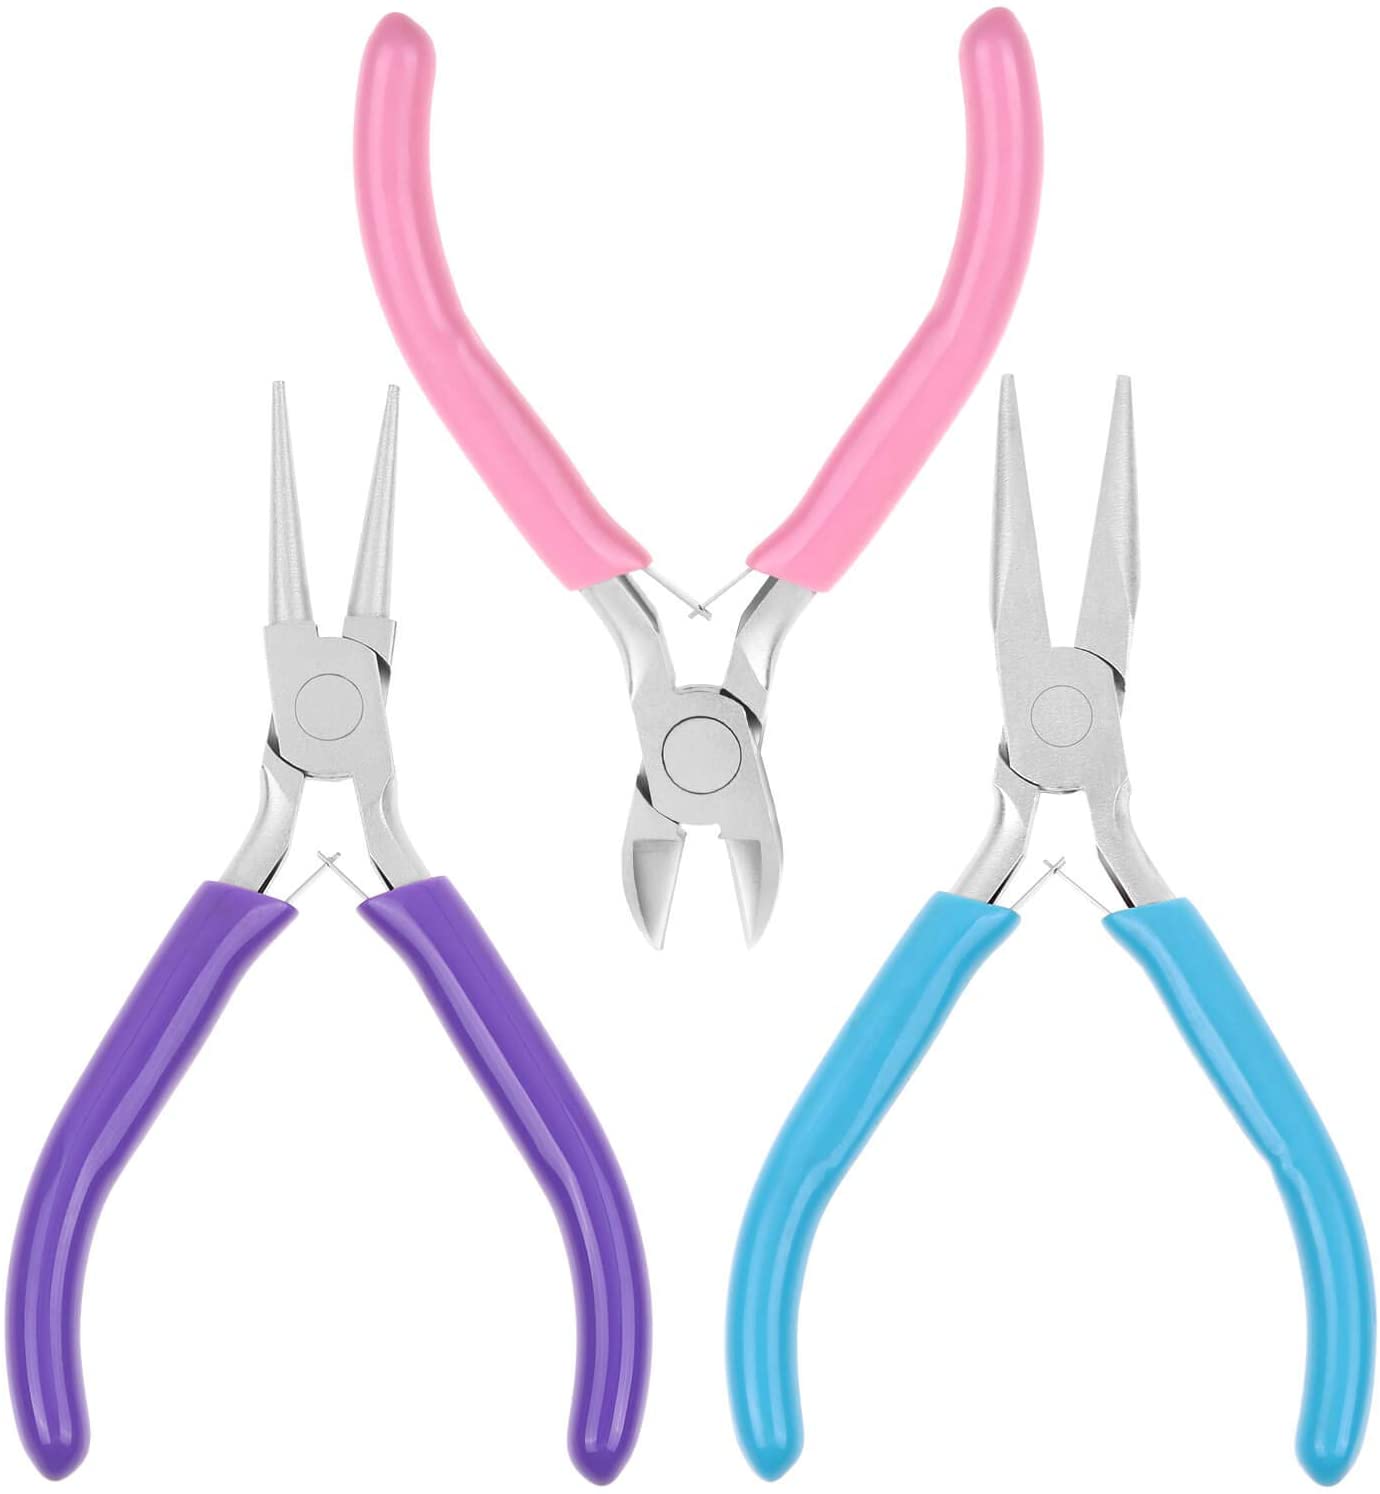 Jewelry Pliers, Jewelry Making Pliers Tools with Needle Nose